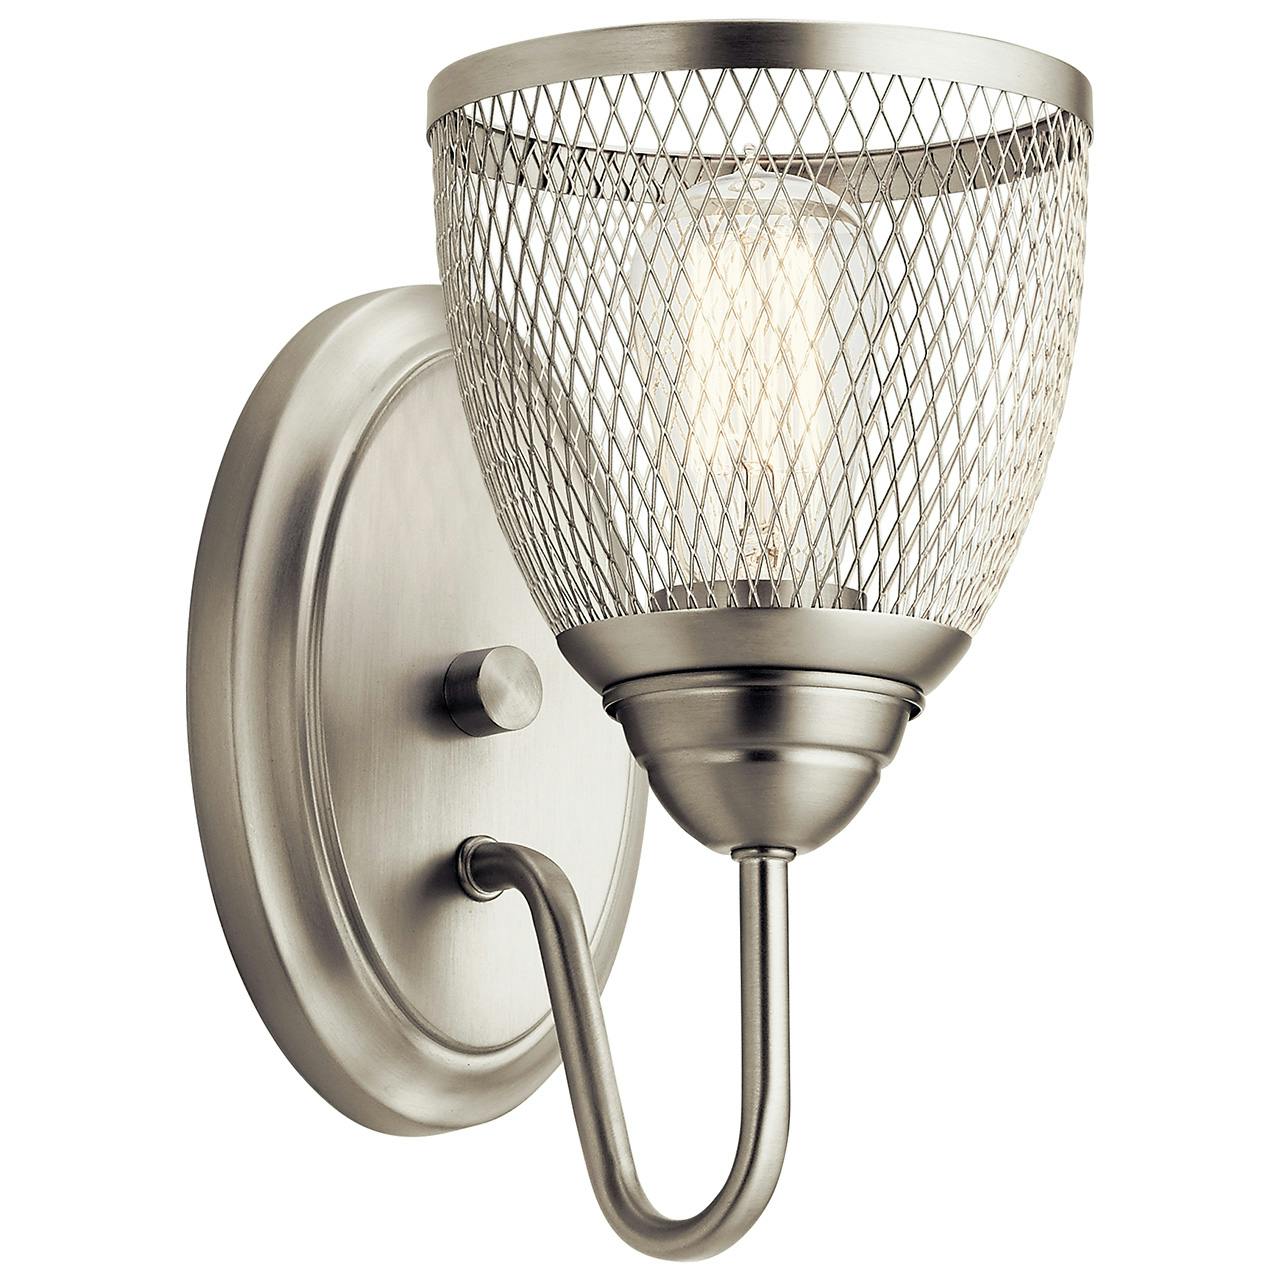 Voclain 1 Light Wall Sconce Brushed Nickel on a white background